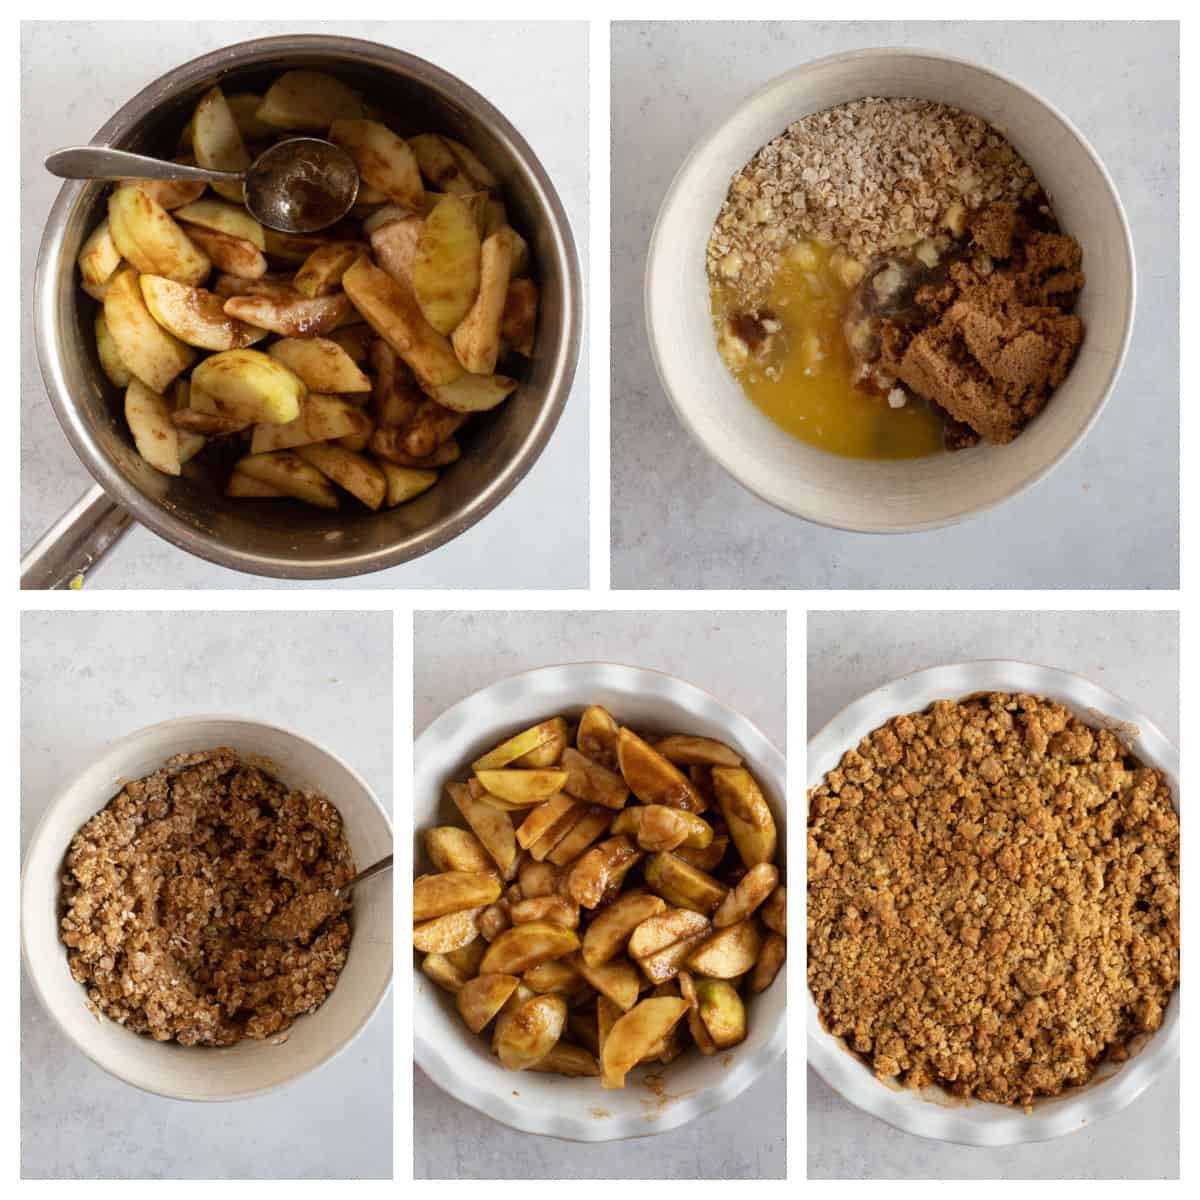 Step by step photo instruction collage for making the apple and pear crumble.